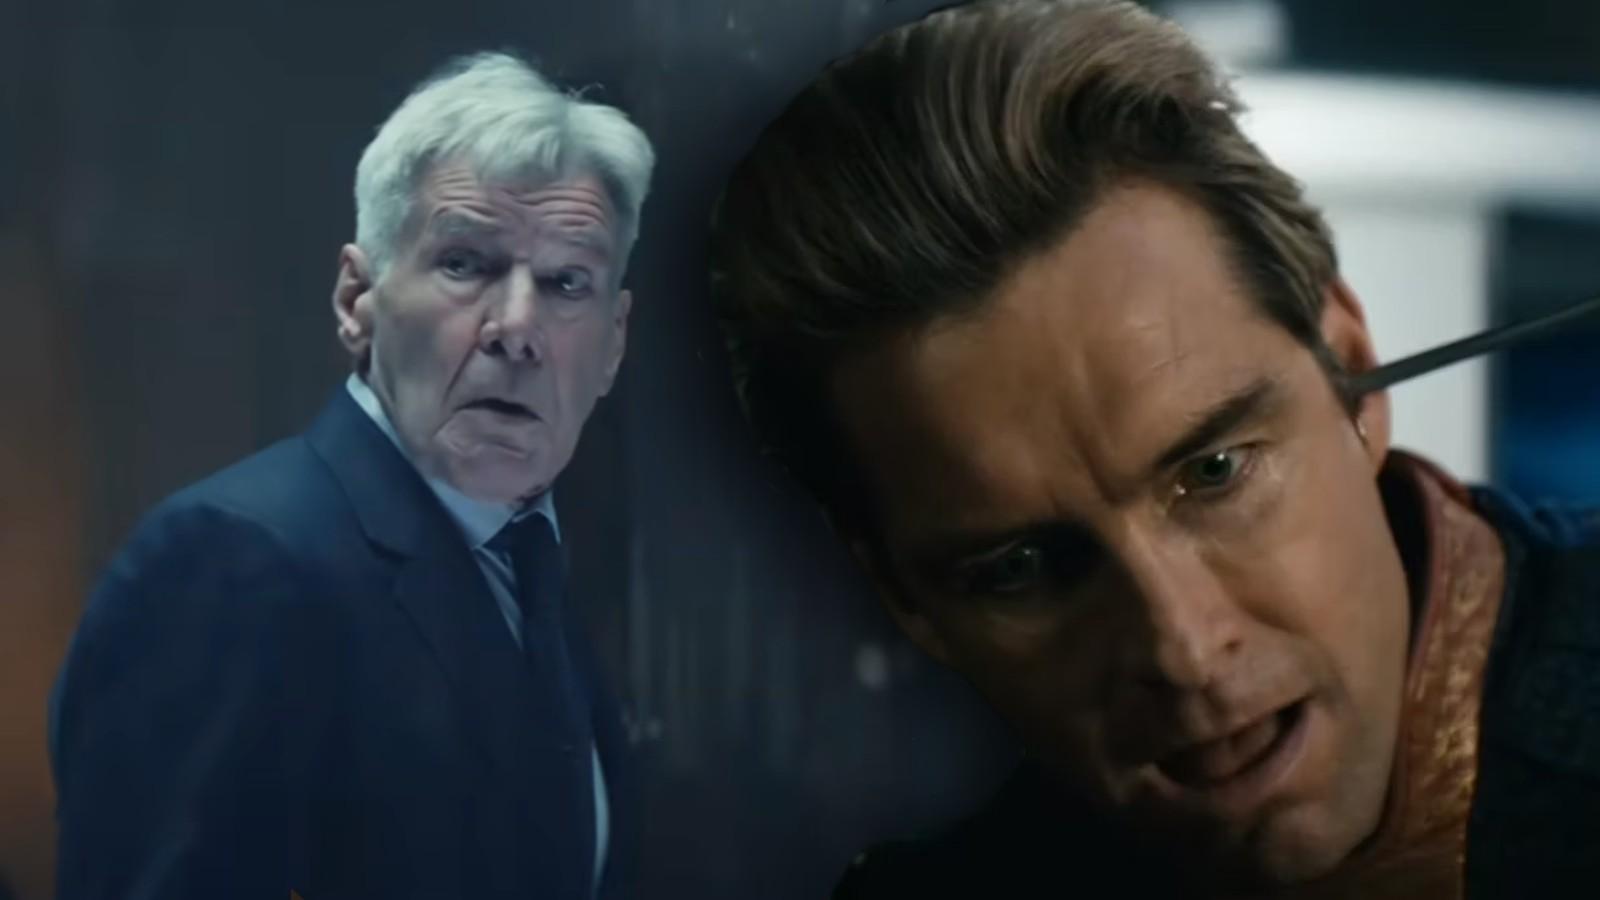 Harrison Ford in Captain America: Brave New World and Antony Starr in The Boys